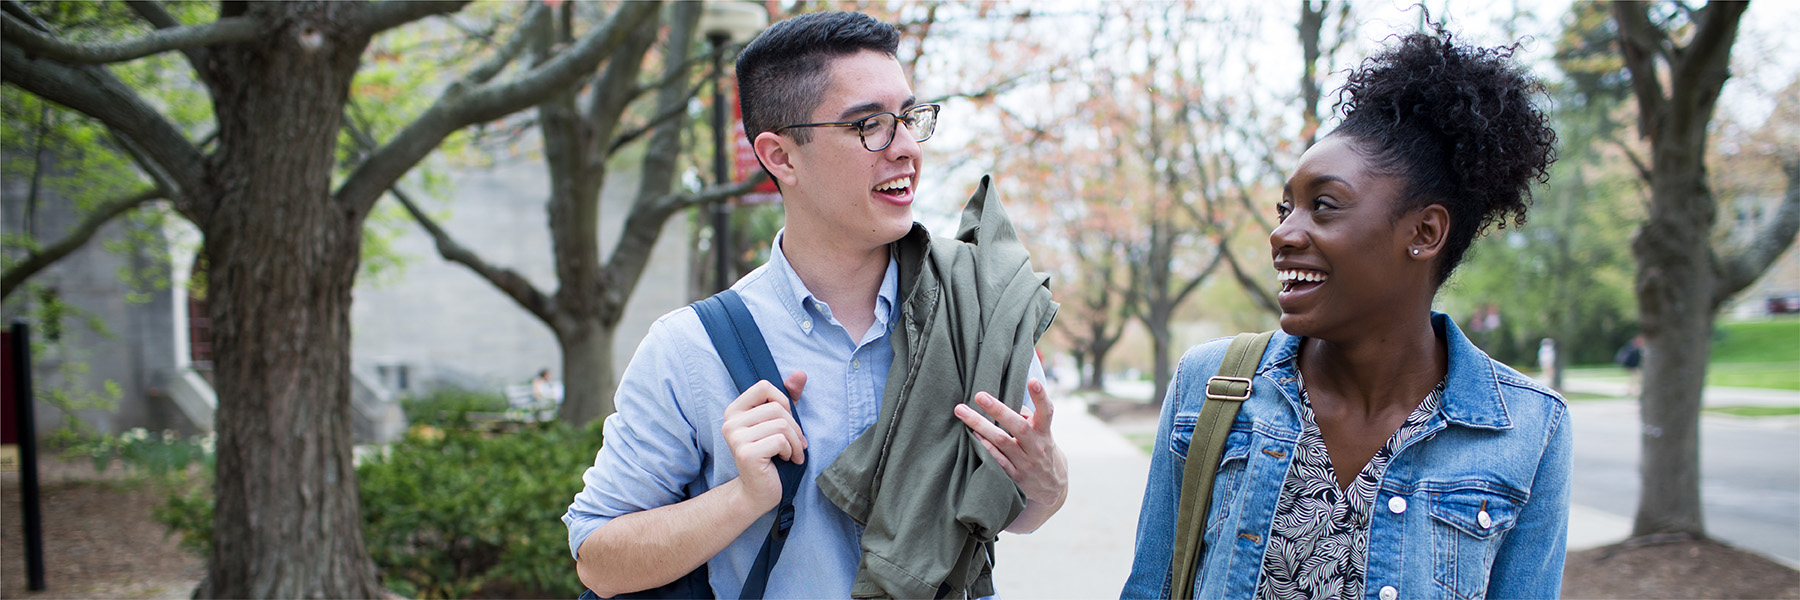 Two students talking as they walk through campus